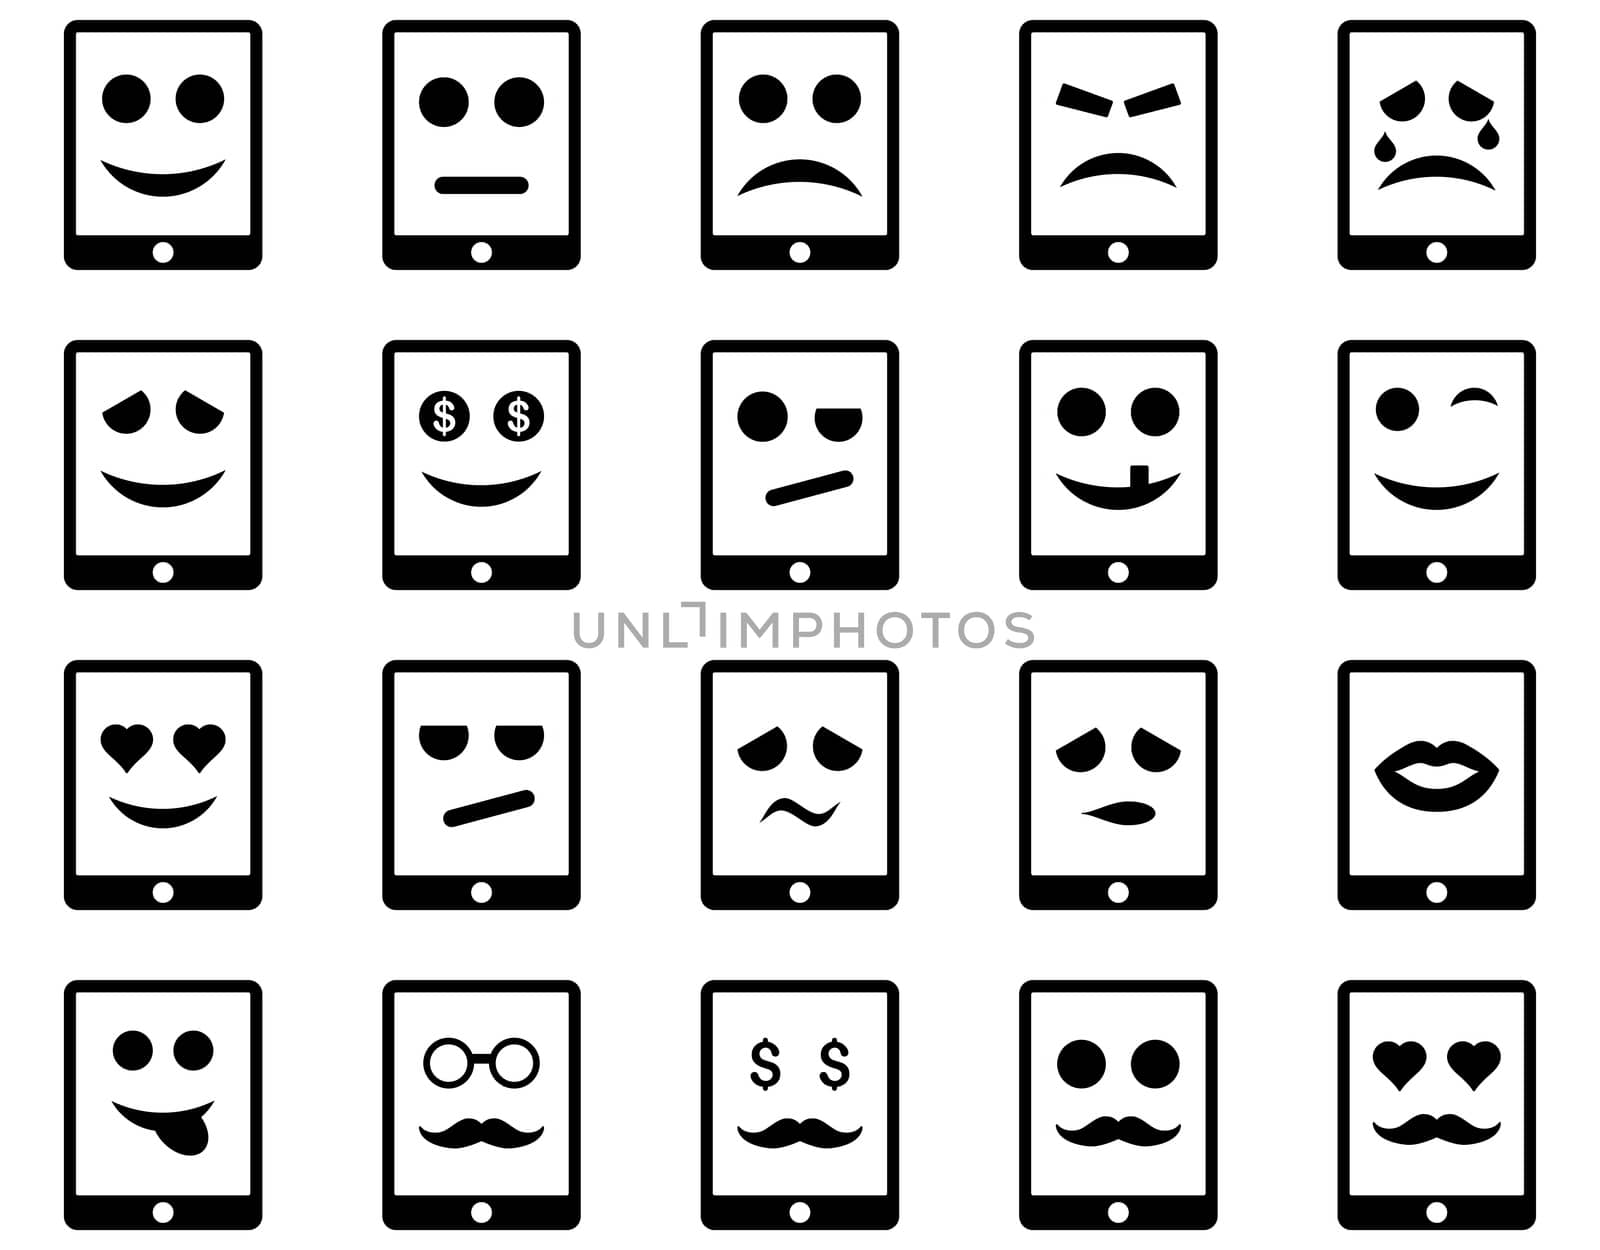 Emotion mobile tablet icons. Glyph set style is flat images, black symbols, isolated on a white background.